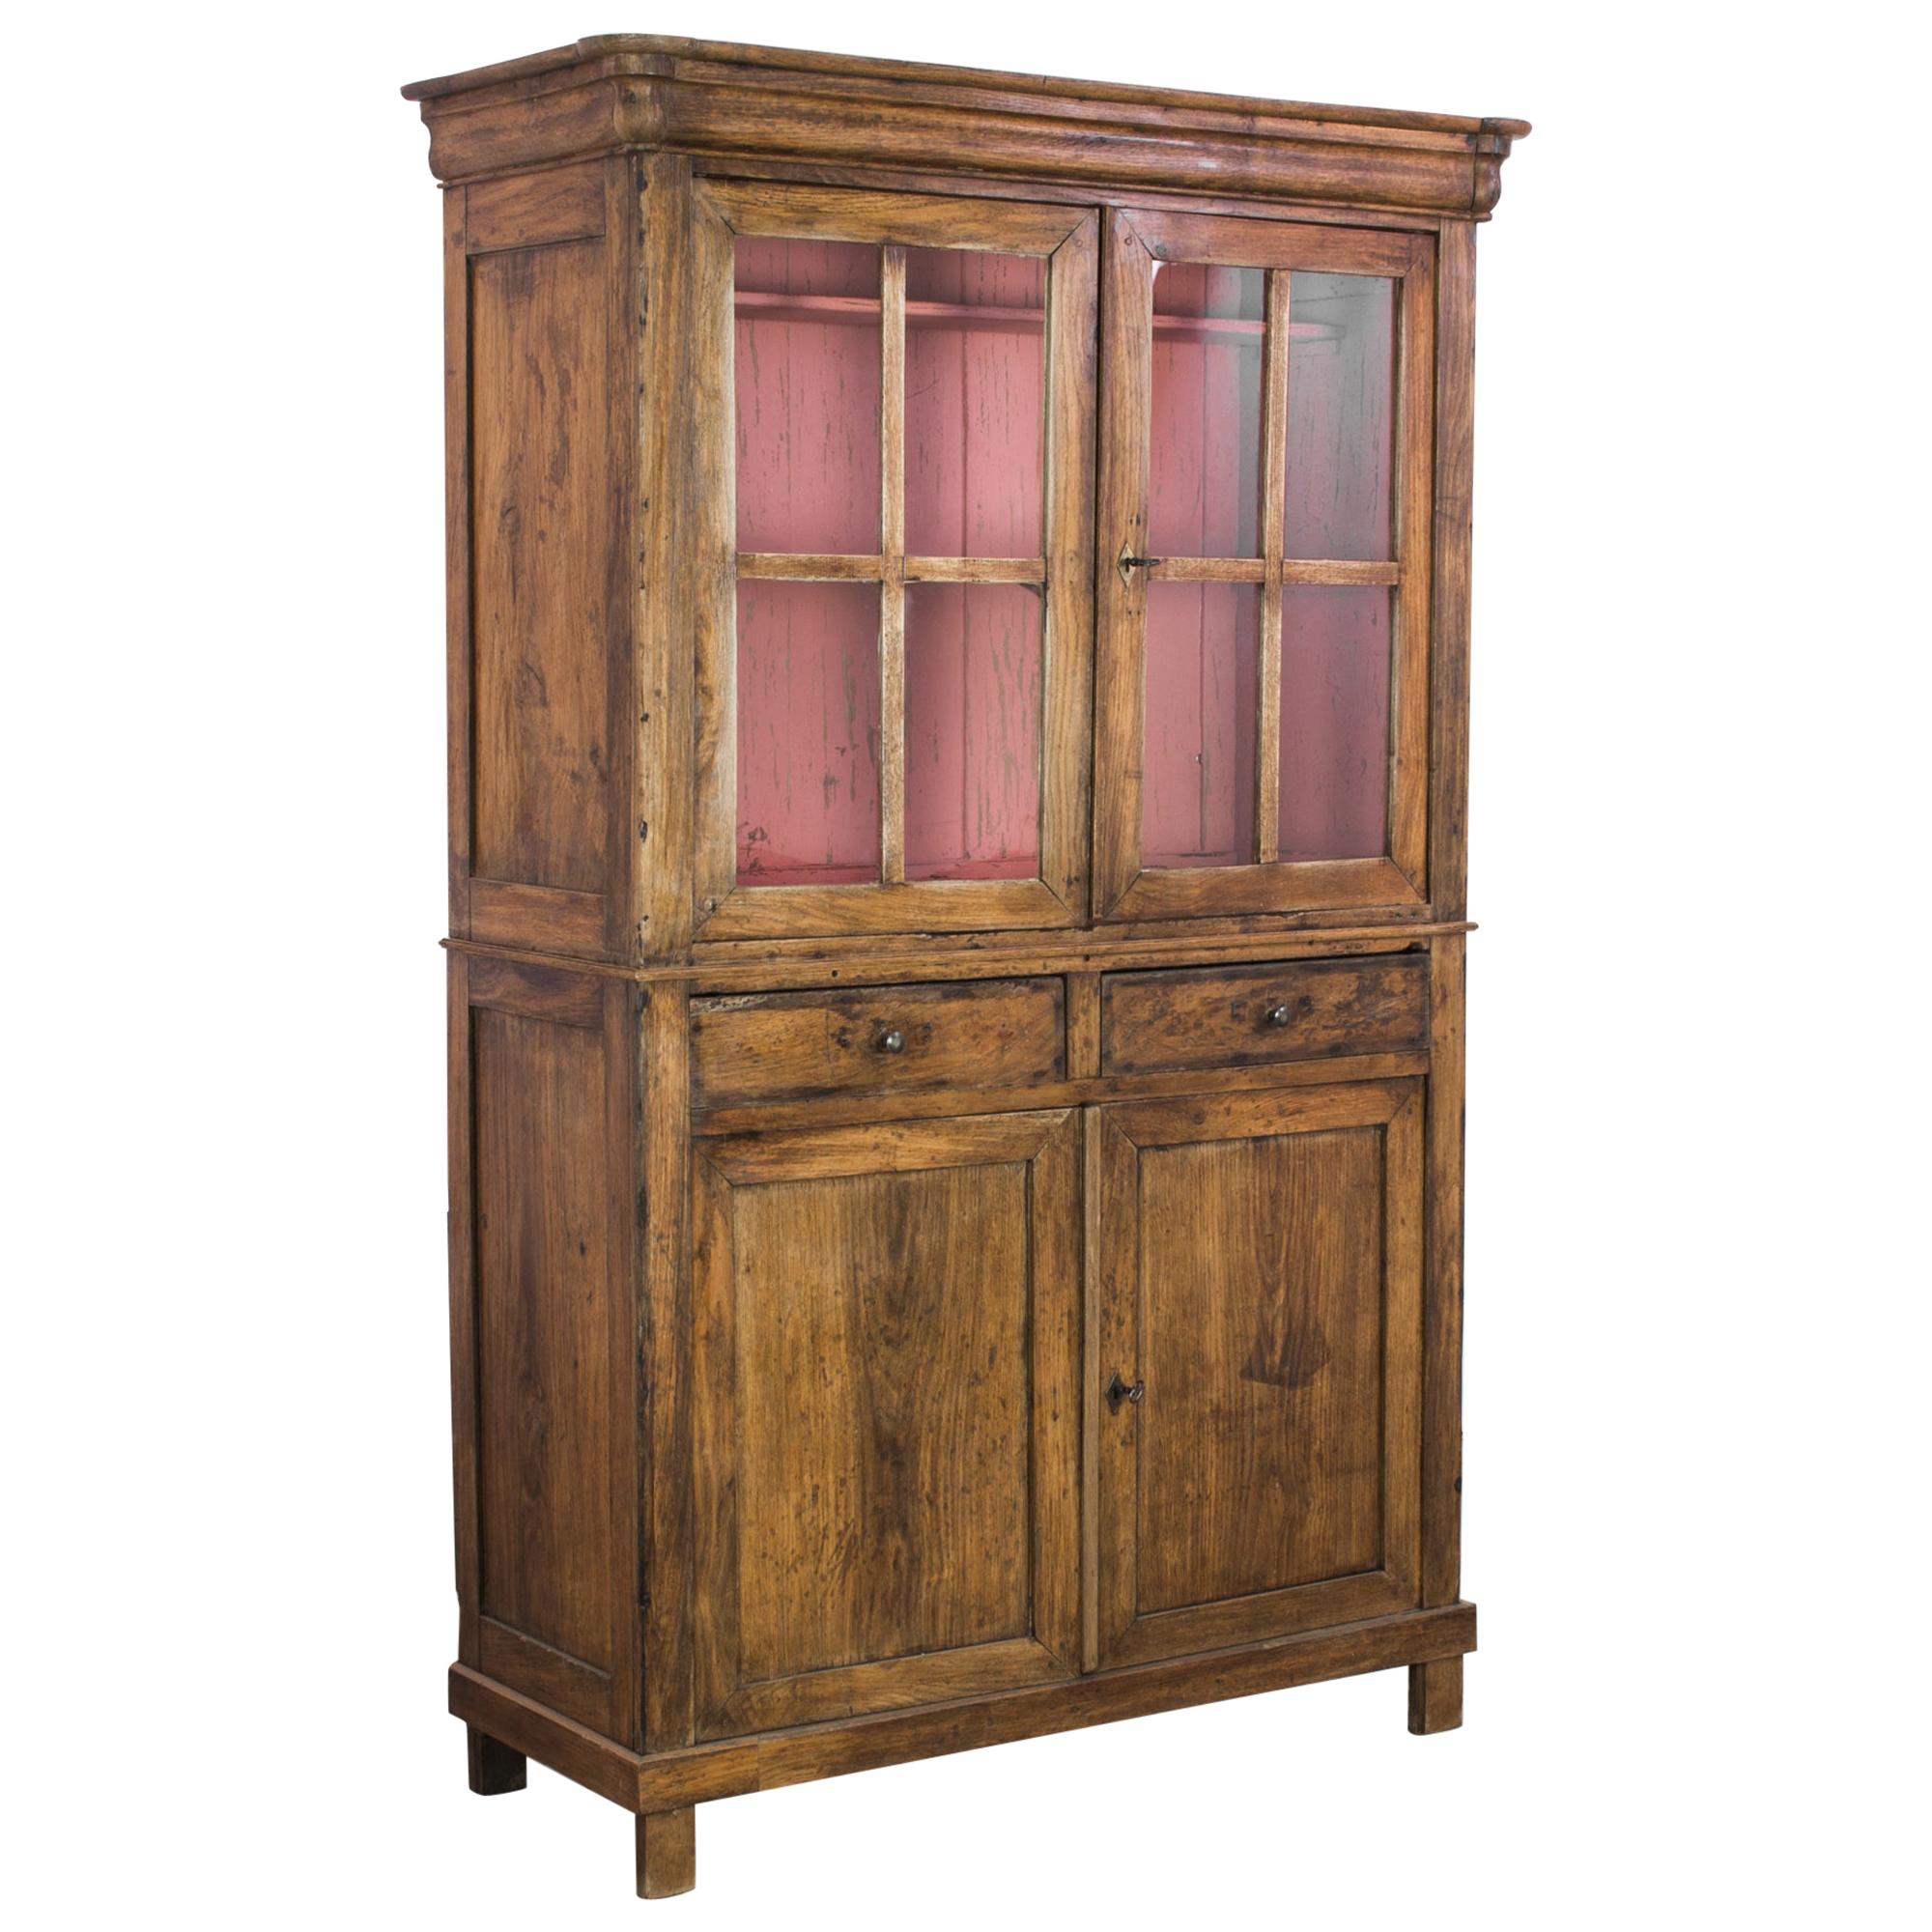 1880s French Country Oak Vitrine with Rose Pink Interior